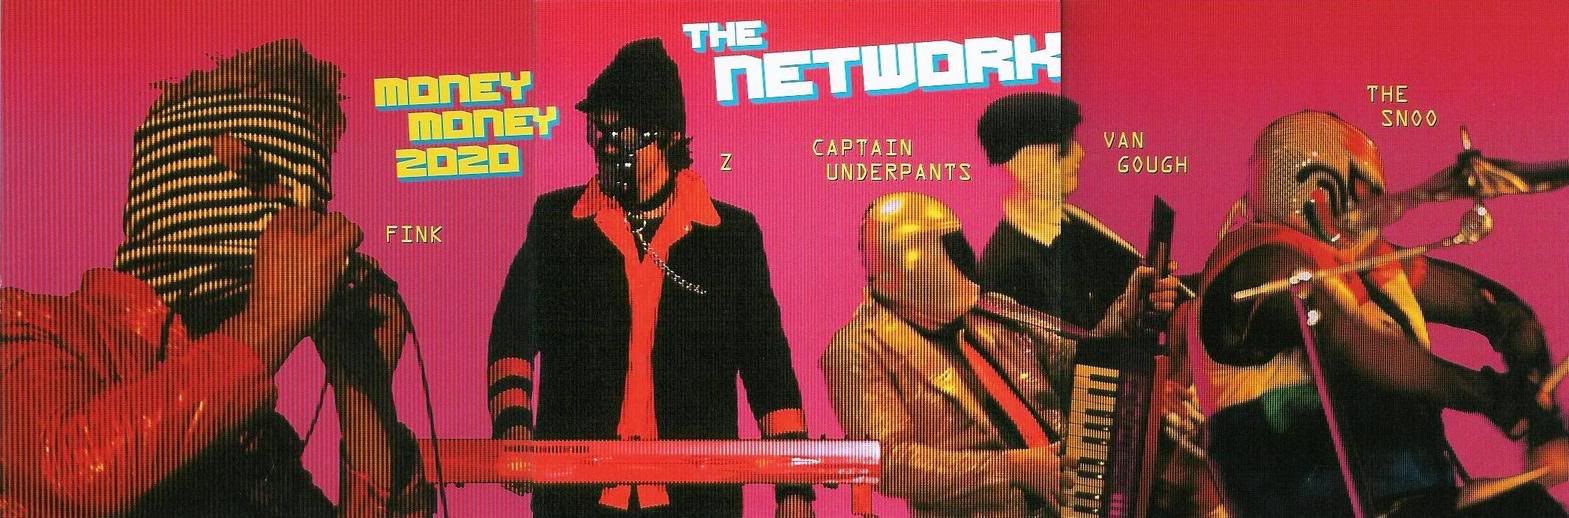 the network!!!